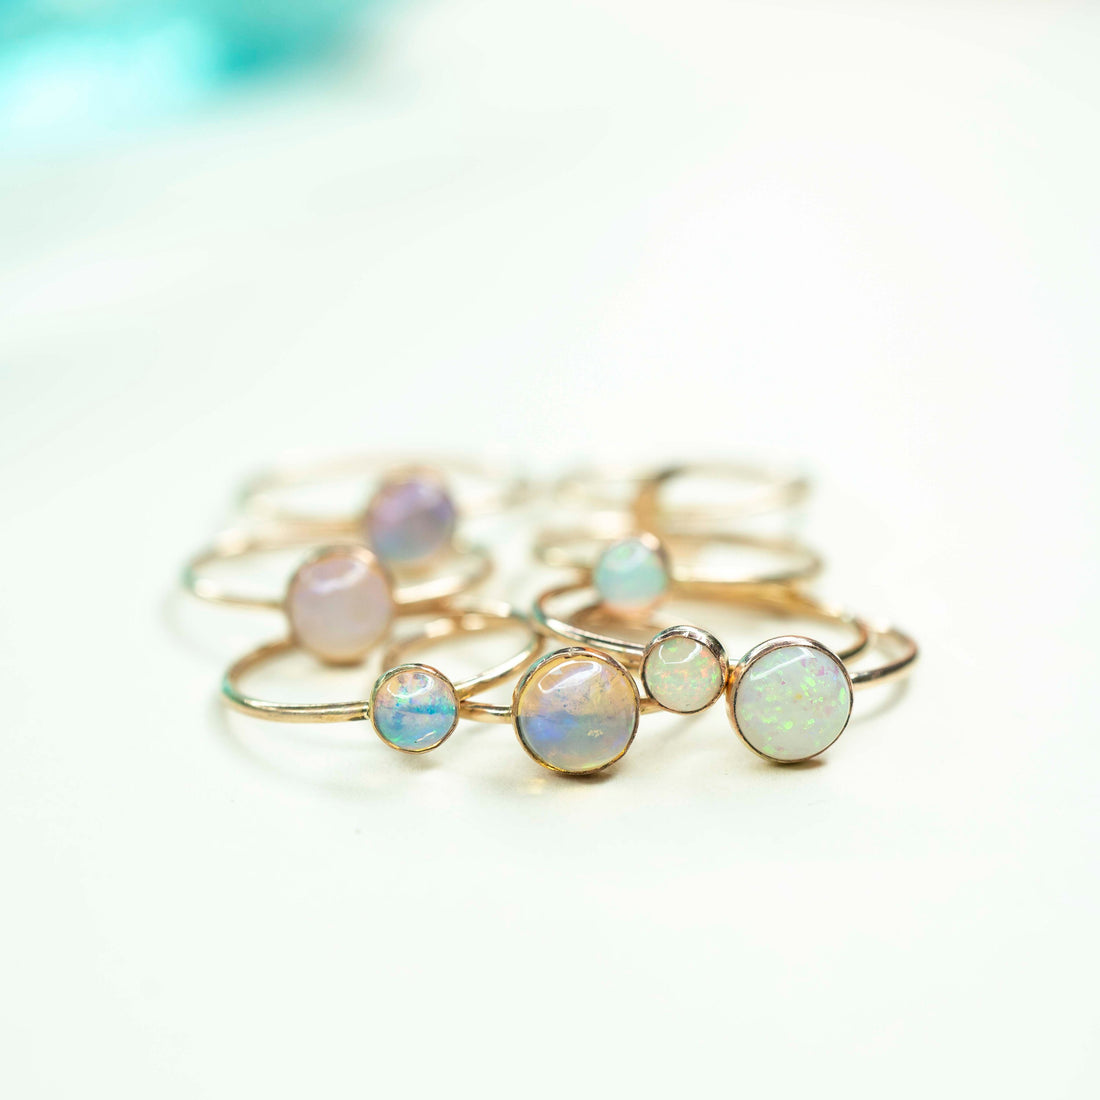 Gold Opal Ring, Gold filled Opal Ring, Natural Opal Ring, Opal Ring, 14k Gold Opal Ring, Handmade Opal Ring, Dainty Opal Ring